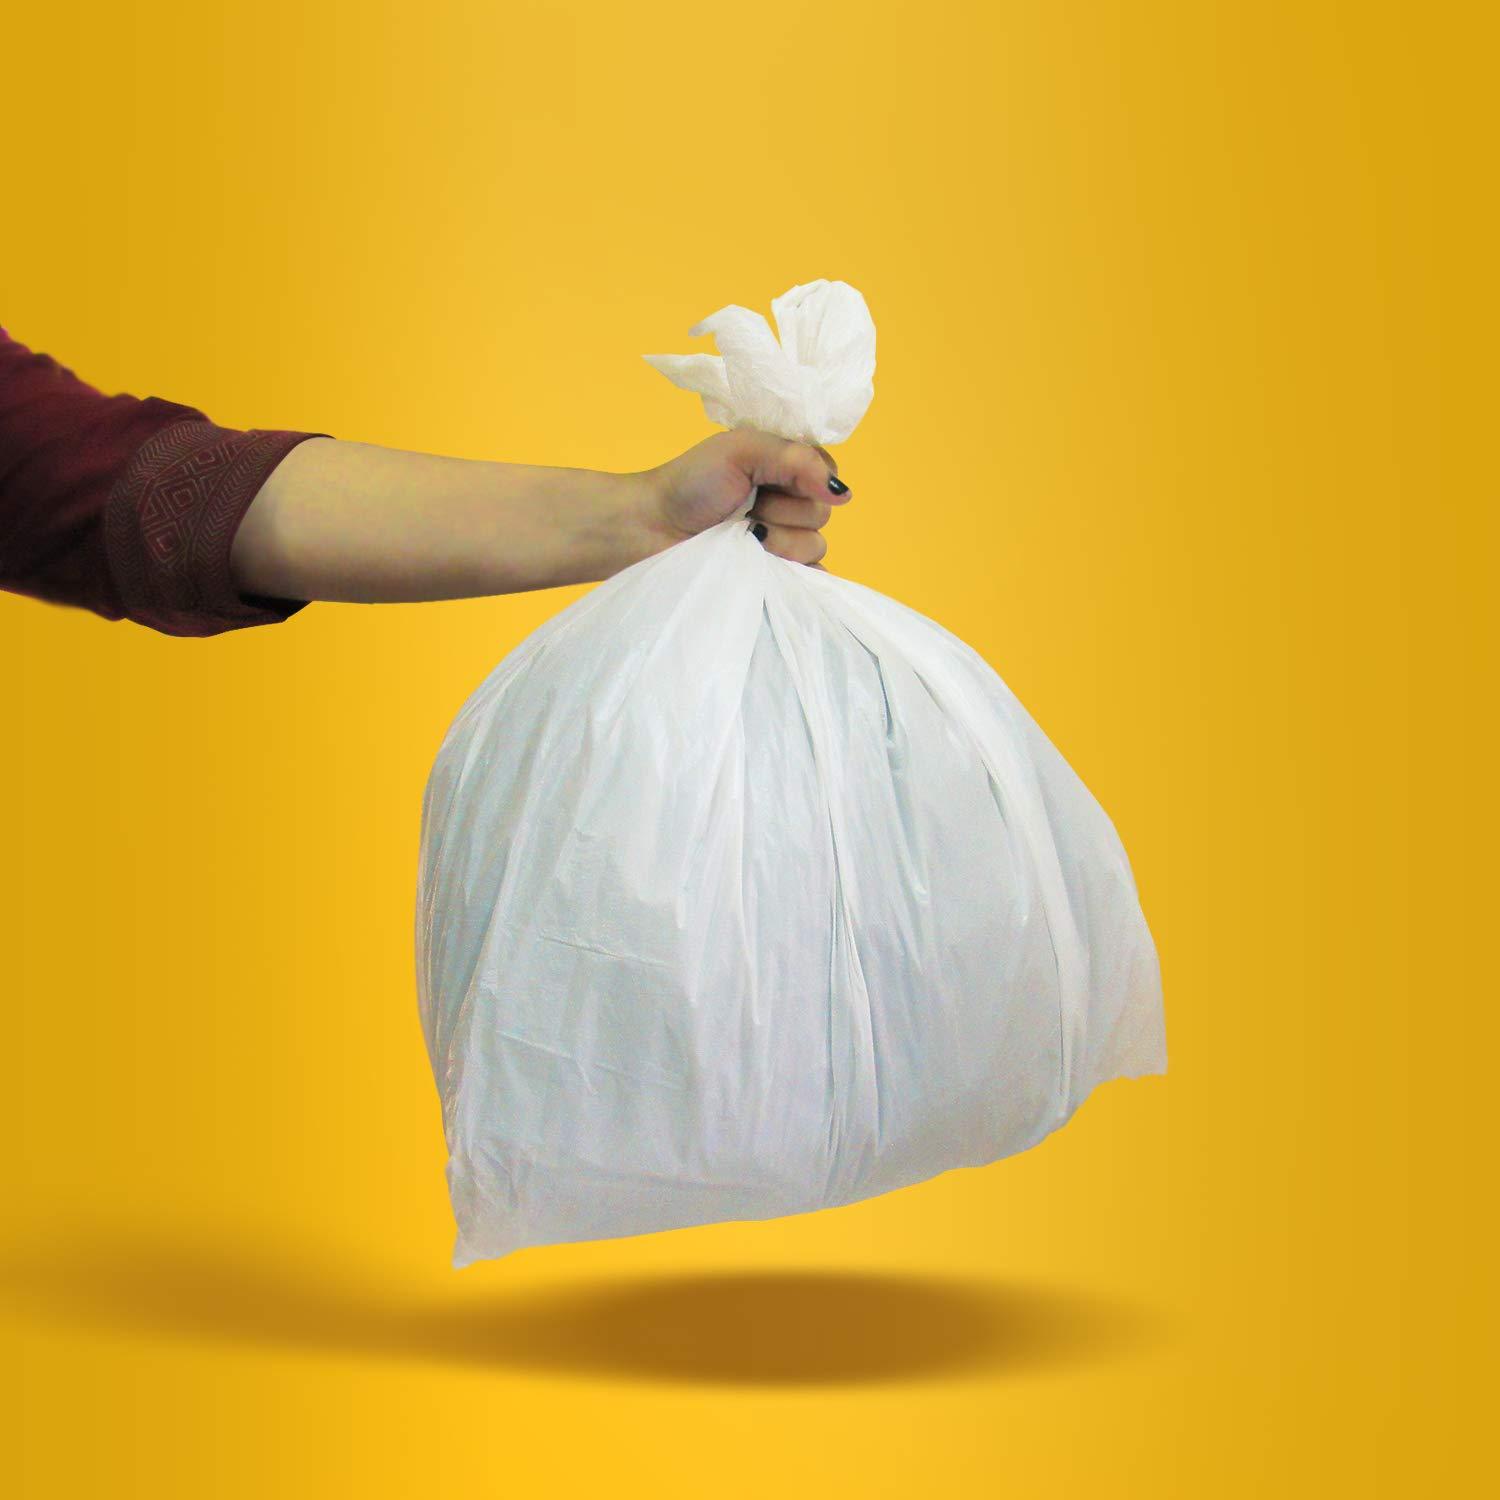 Commercial 18 Gallon Trash Compactor Bags /w Drawstrings - 2 MIL - 50  Count